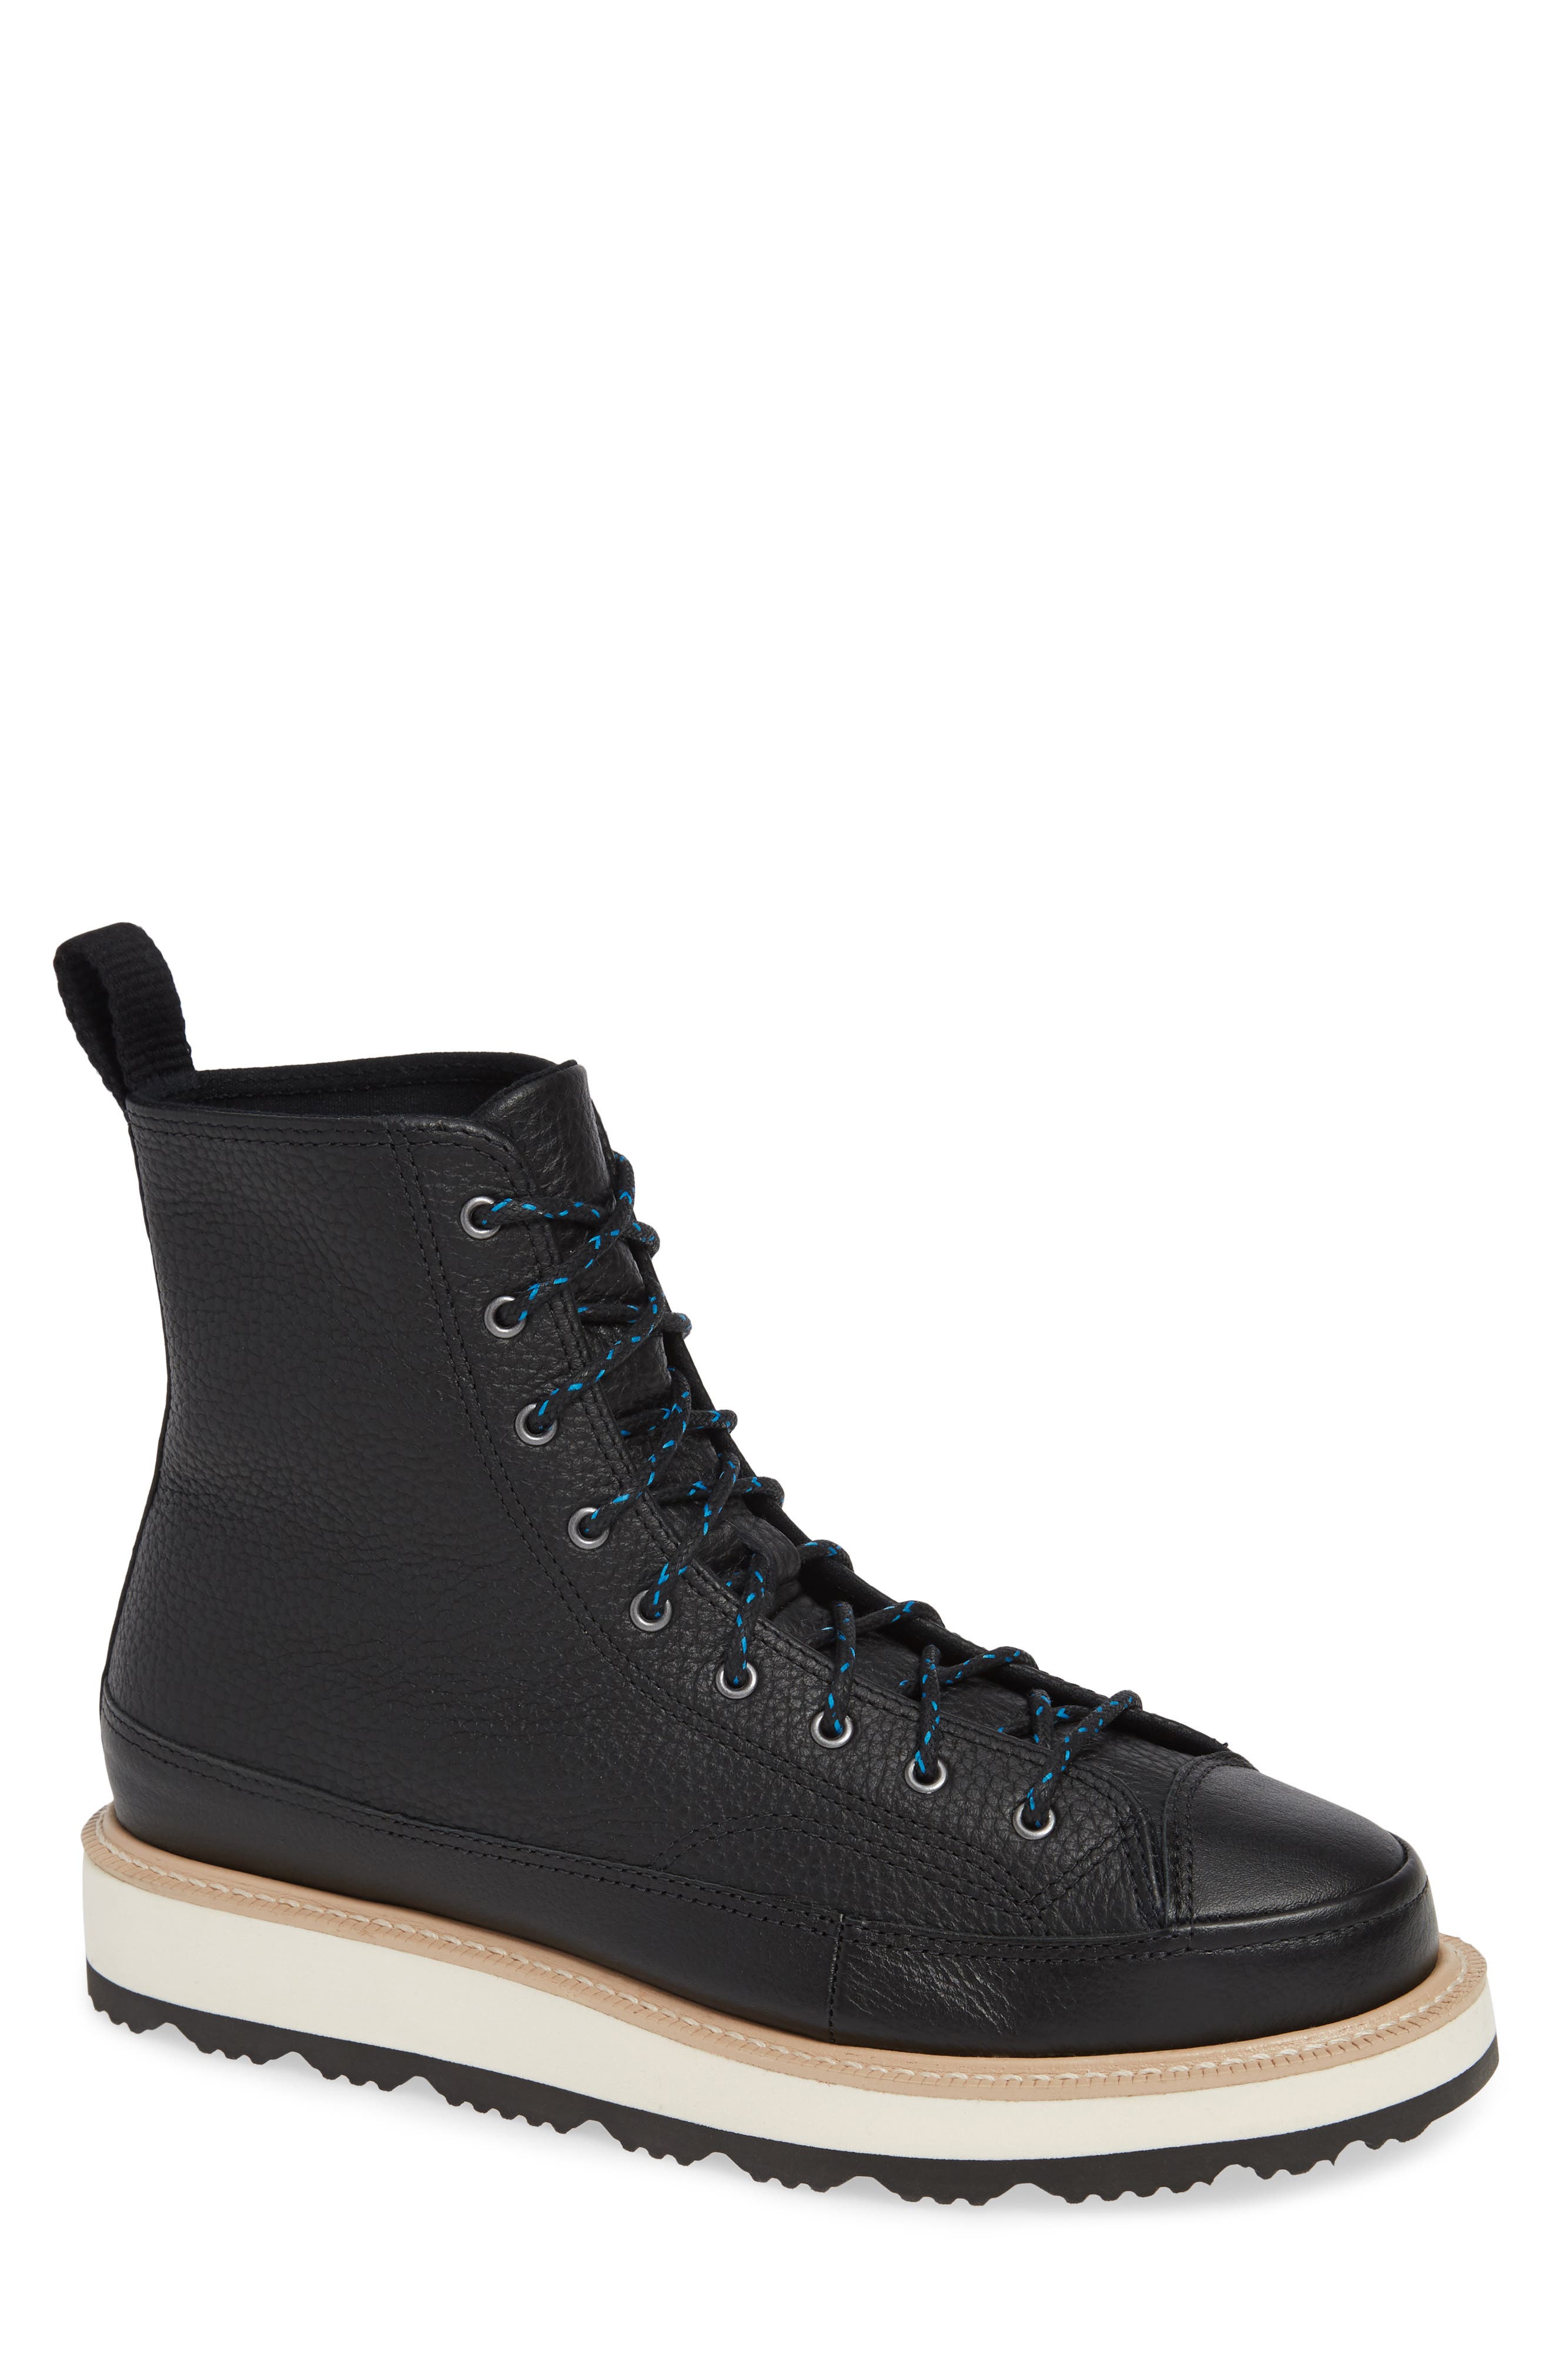 chuck taylor all star crafted boot